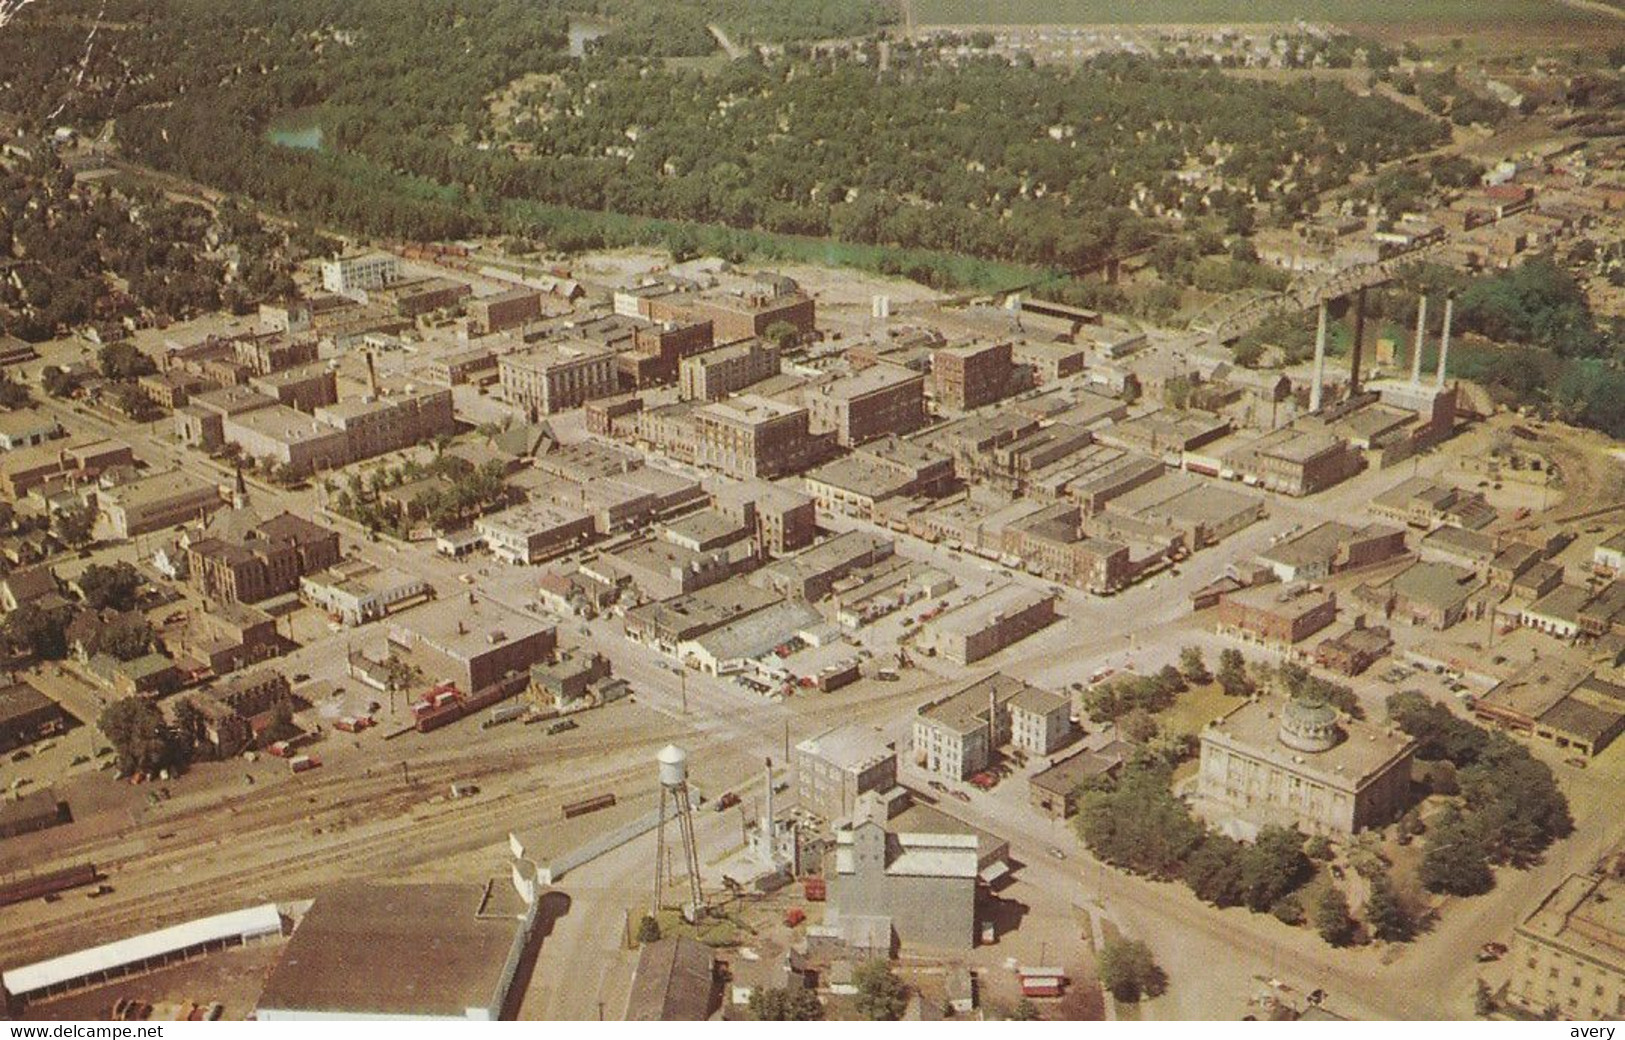 Aerial View Looking East, Showing The Business District Of Grand Forks, North Dakota - Grand Forks